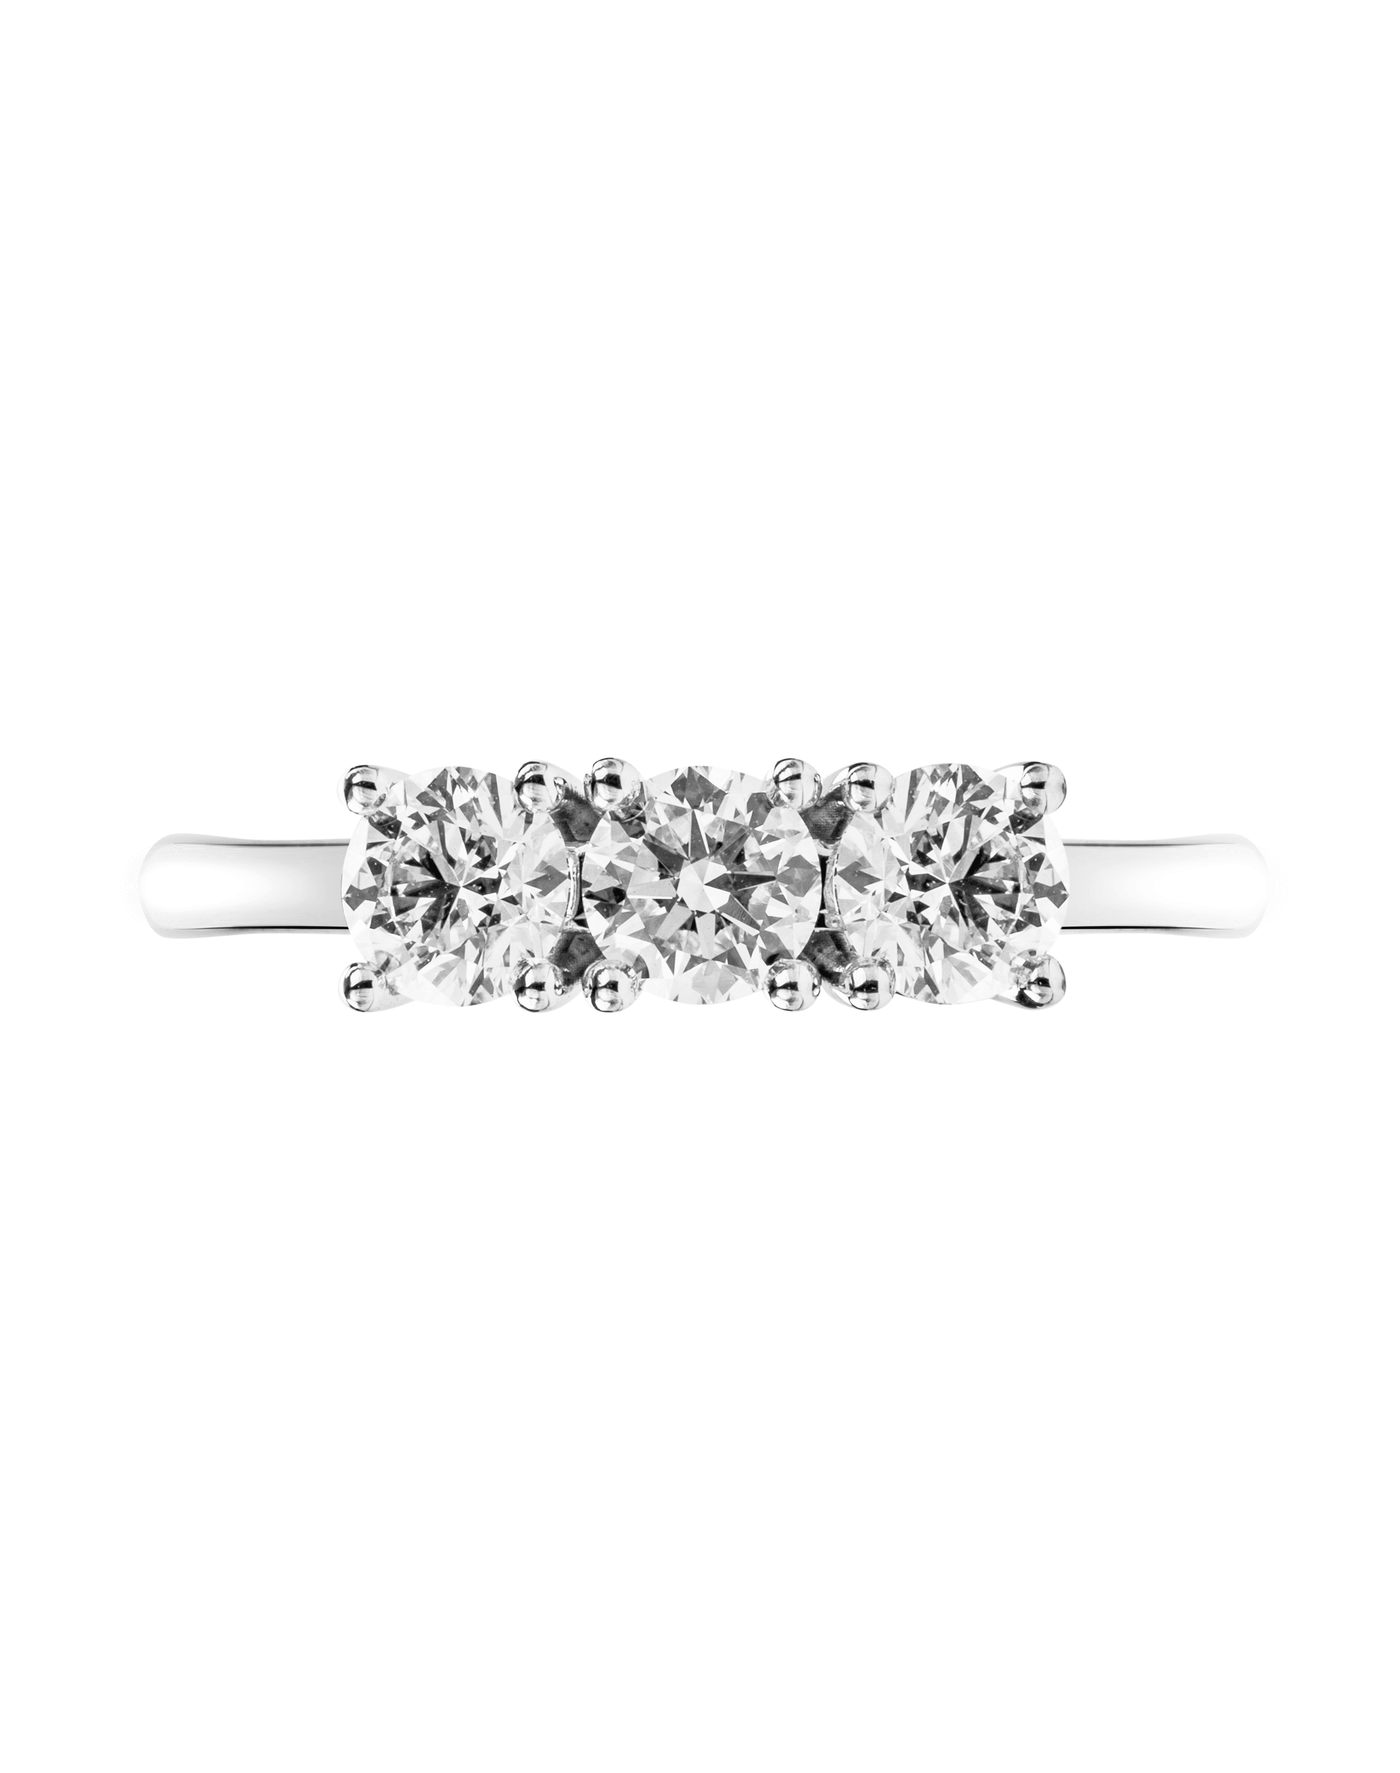 TRILOGY 5 - Riviera Engagement Ring - Moregola Fine Jewelry